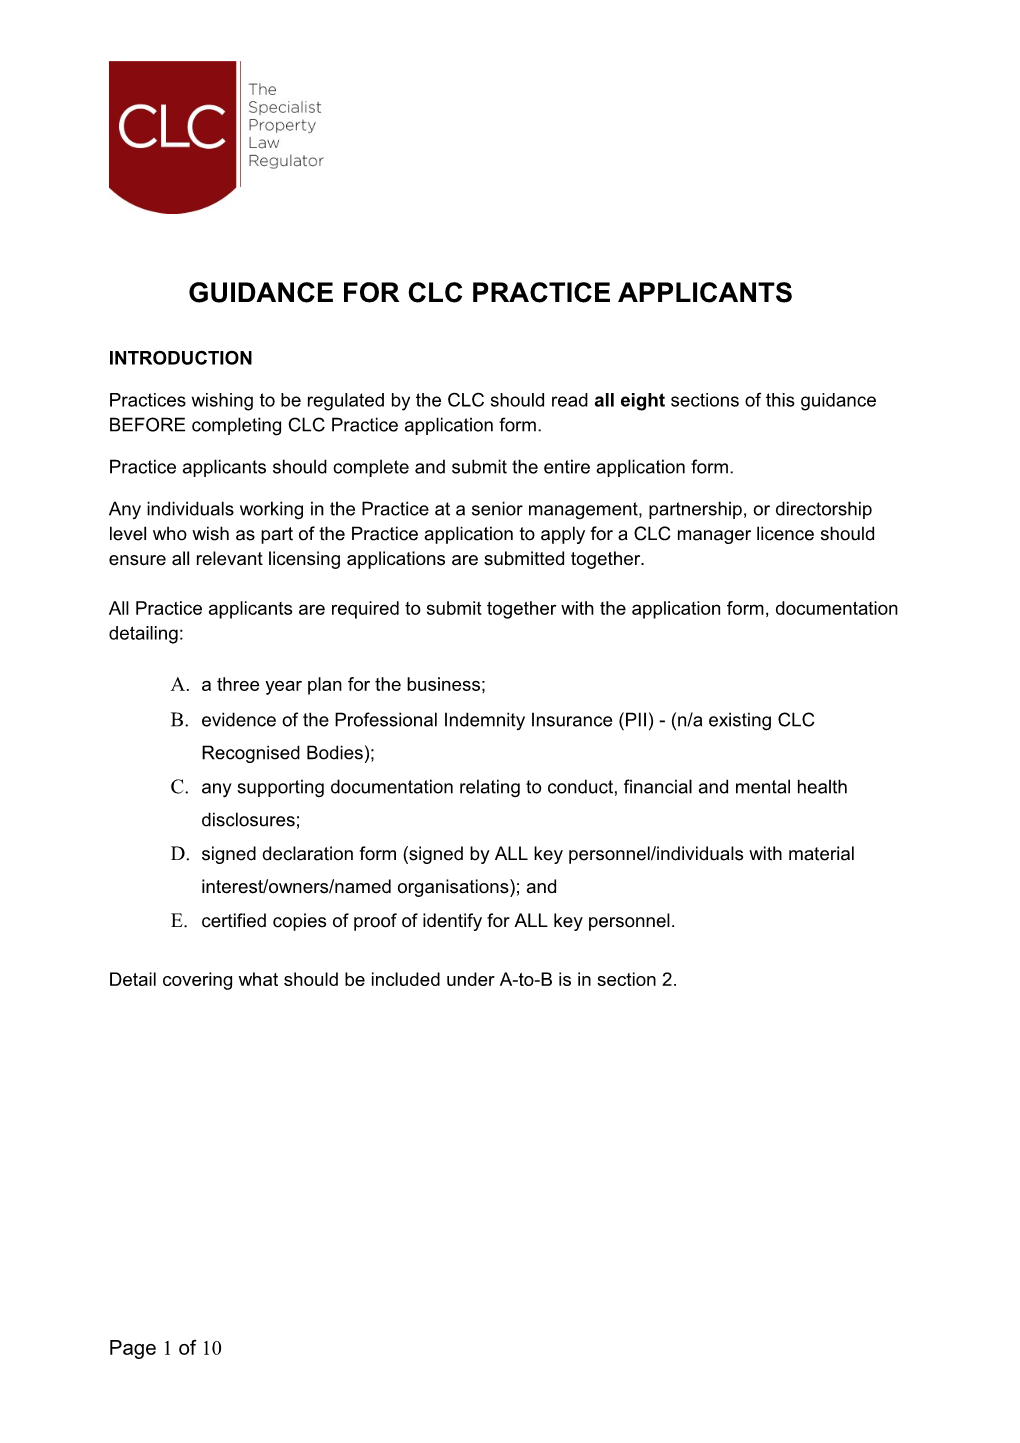 Guidance for Clc Practice Applicants